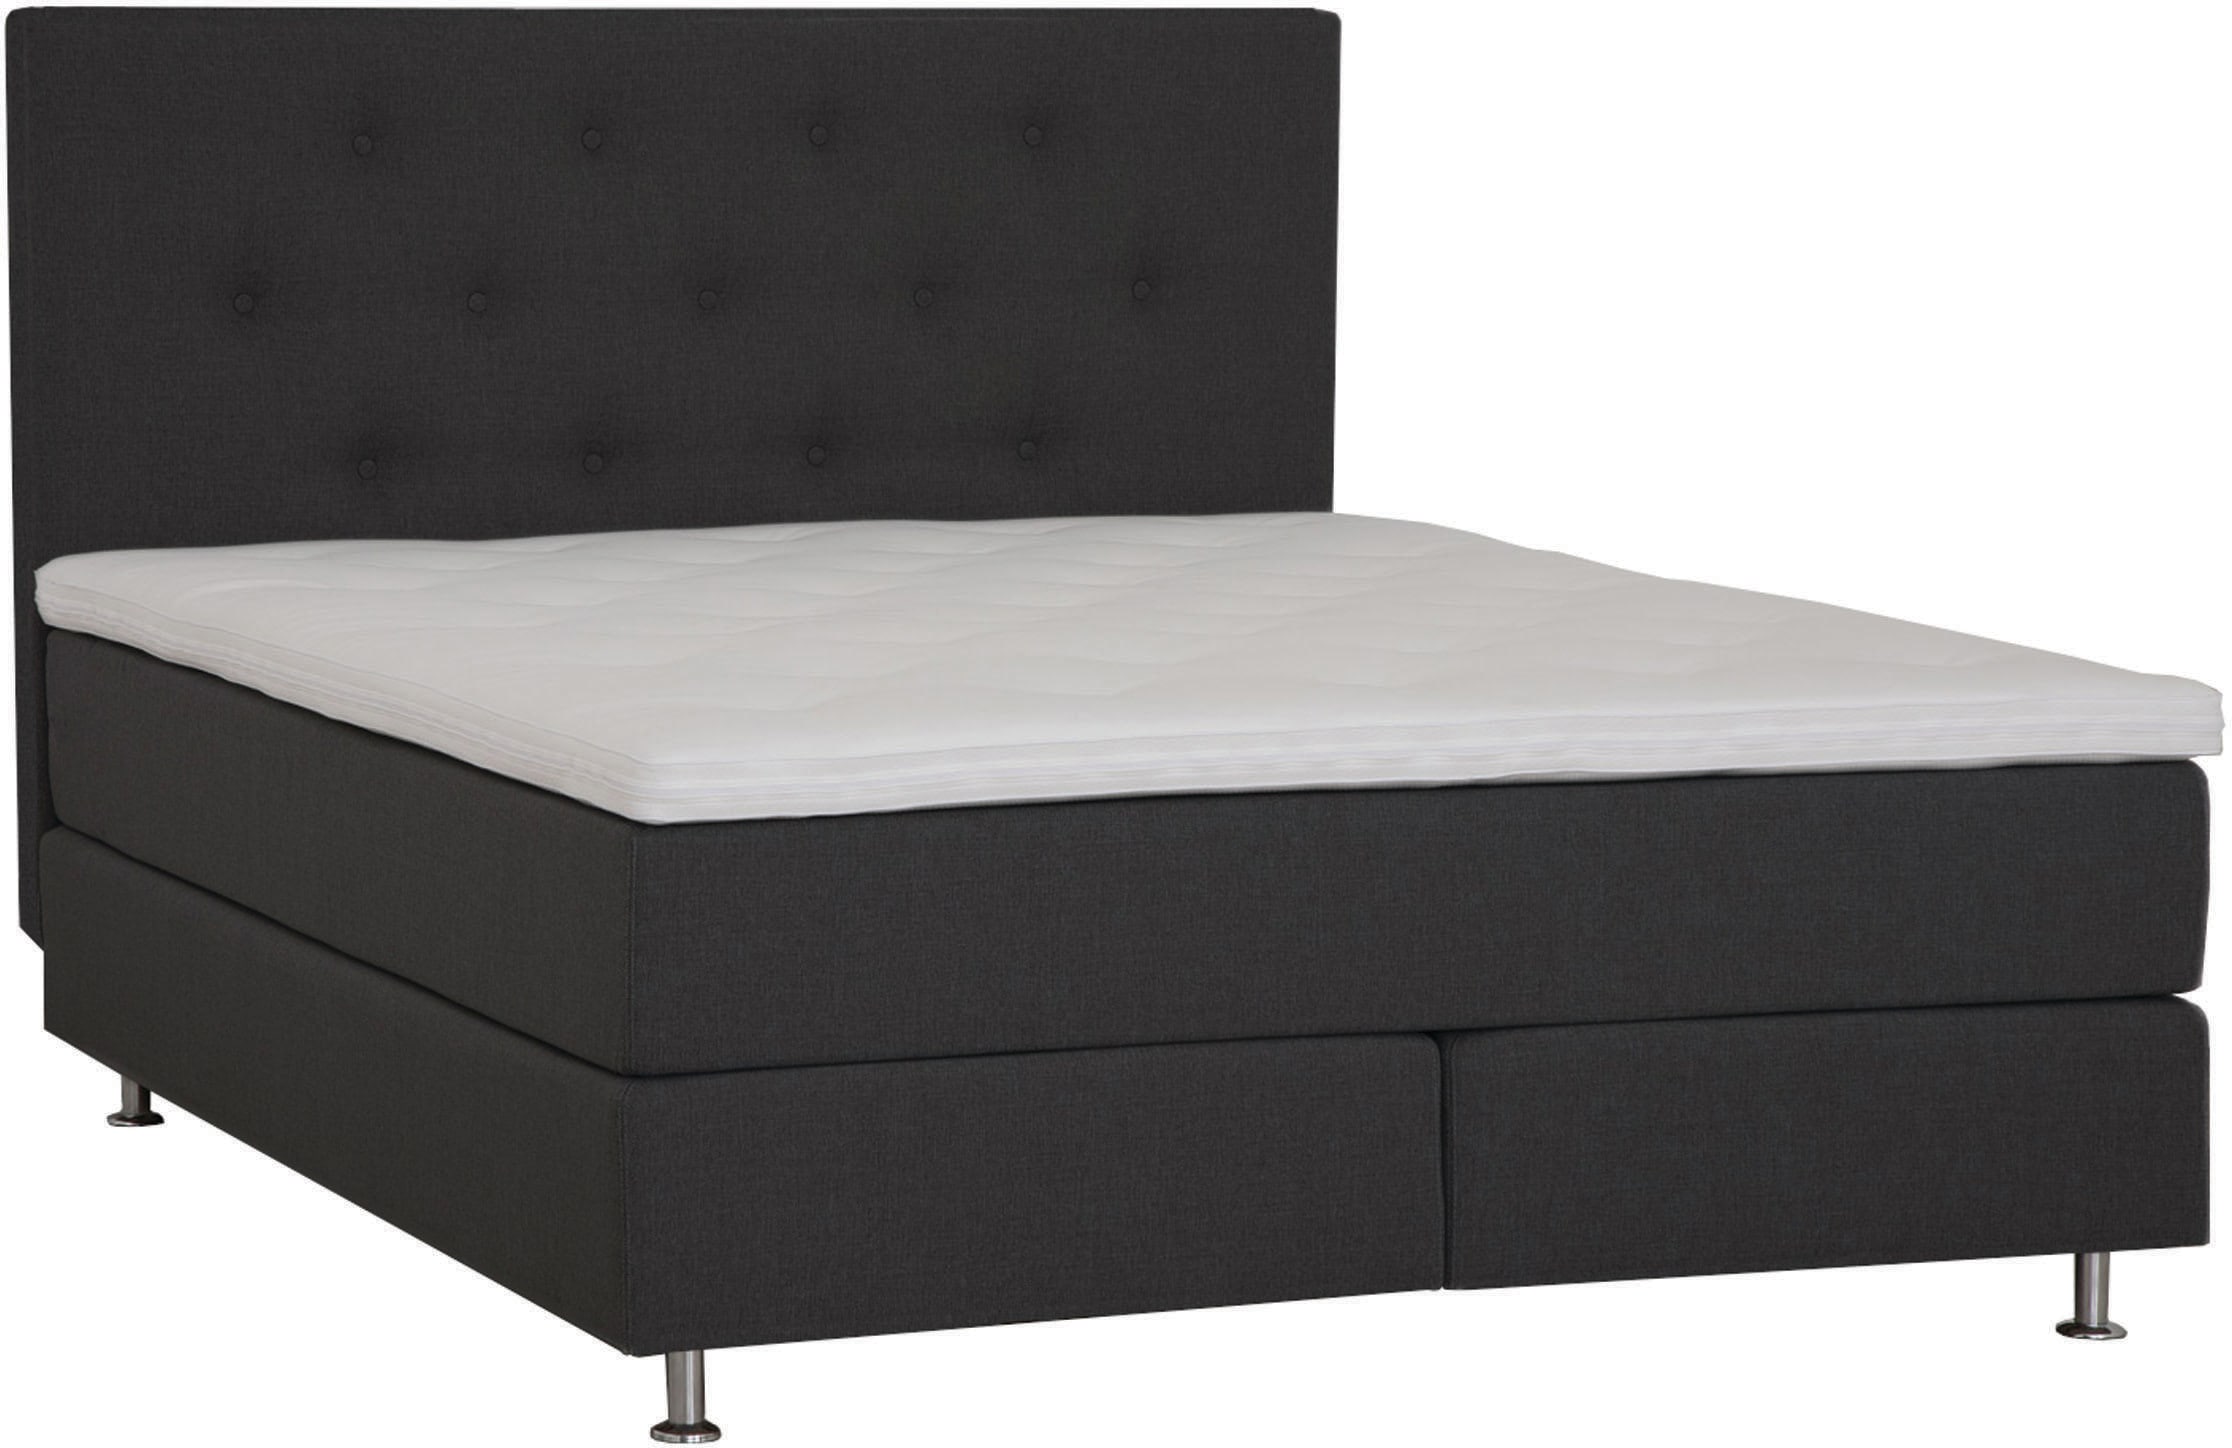 Places of Style Boxspringbett »Nordica«, inkl. Topper, auch in Überlänge 200/220 cm